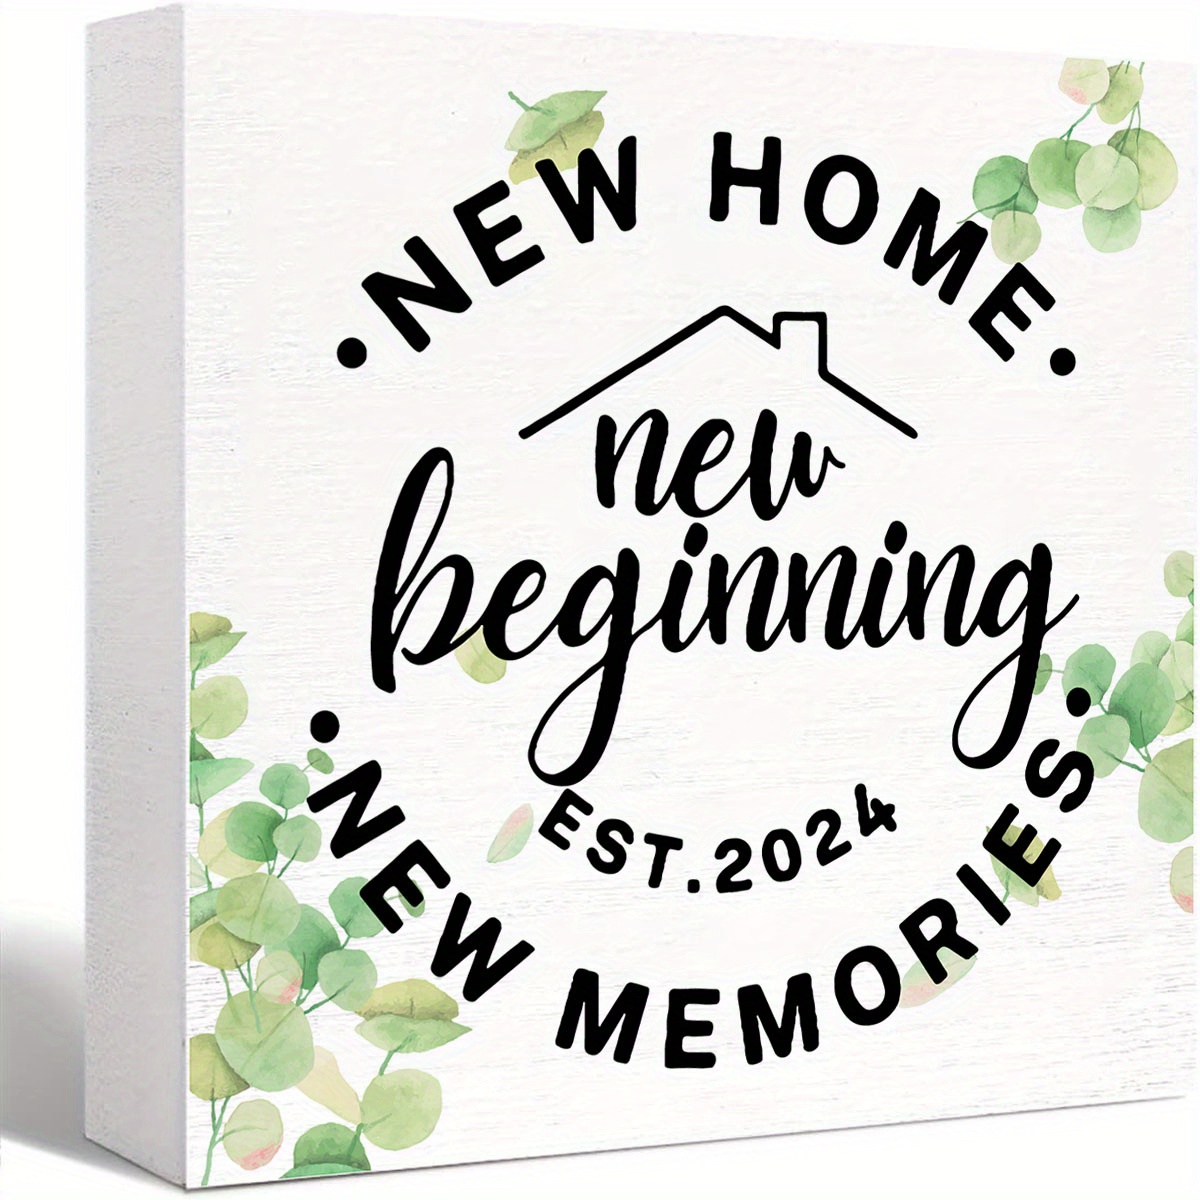 

1pc New Home New Beginning Sign, Great Housewarming Gifts New Home Gift Ideas Great Housewarming Gift New Home Decor Rustic Home Accessories Decor New Home New Beginning New Memories Wooden Box